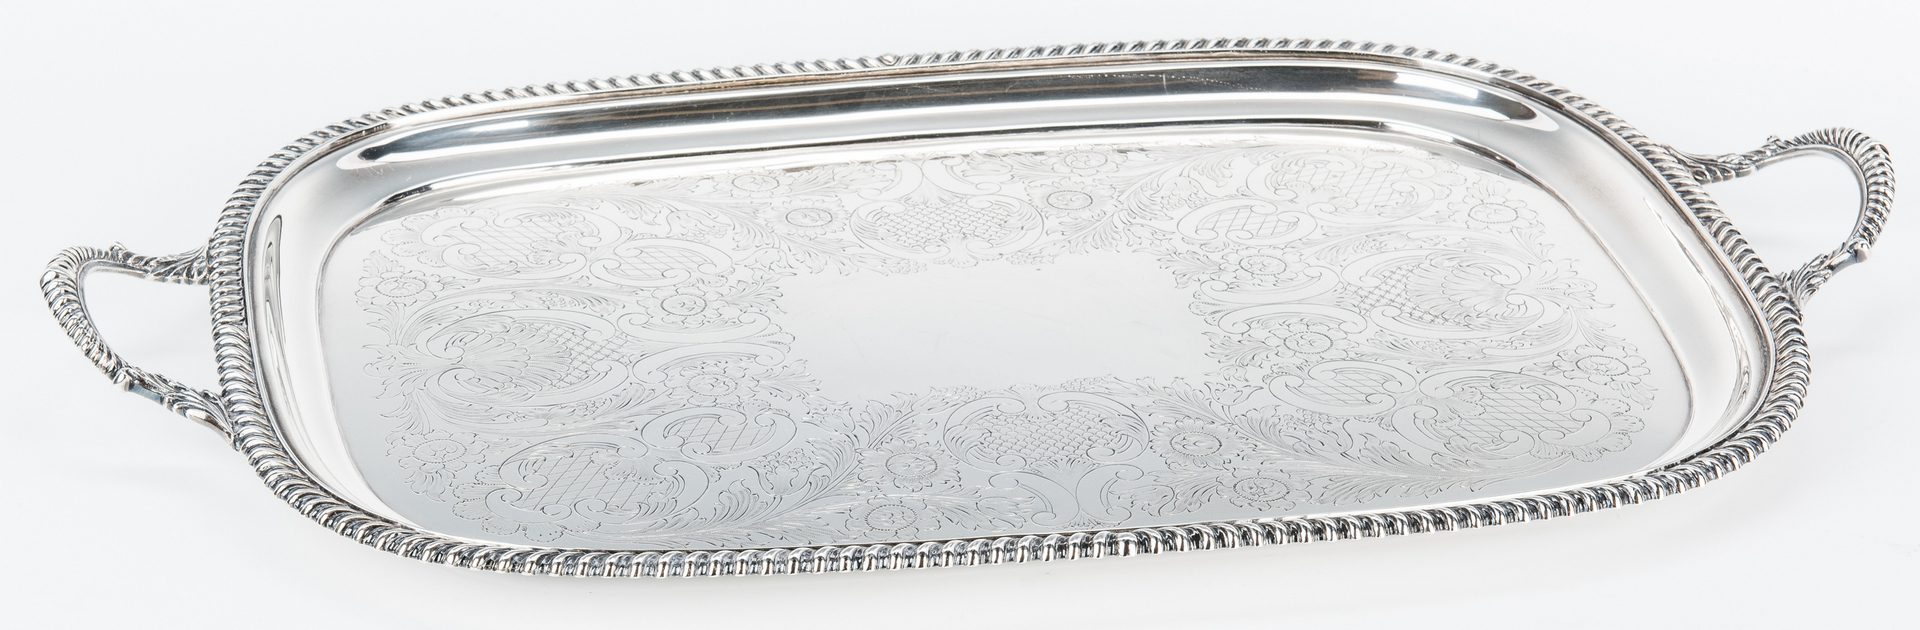 Lot 65: English Sterling Serving Tray, 108 oz by Barker Bros.